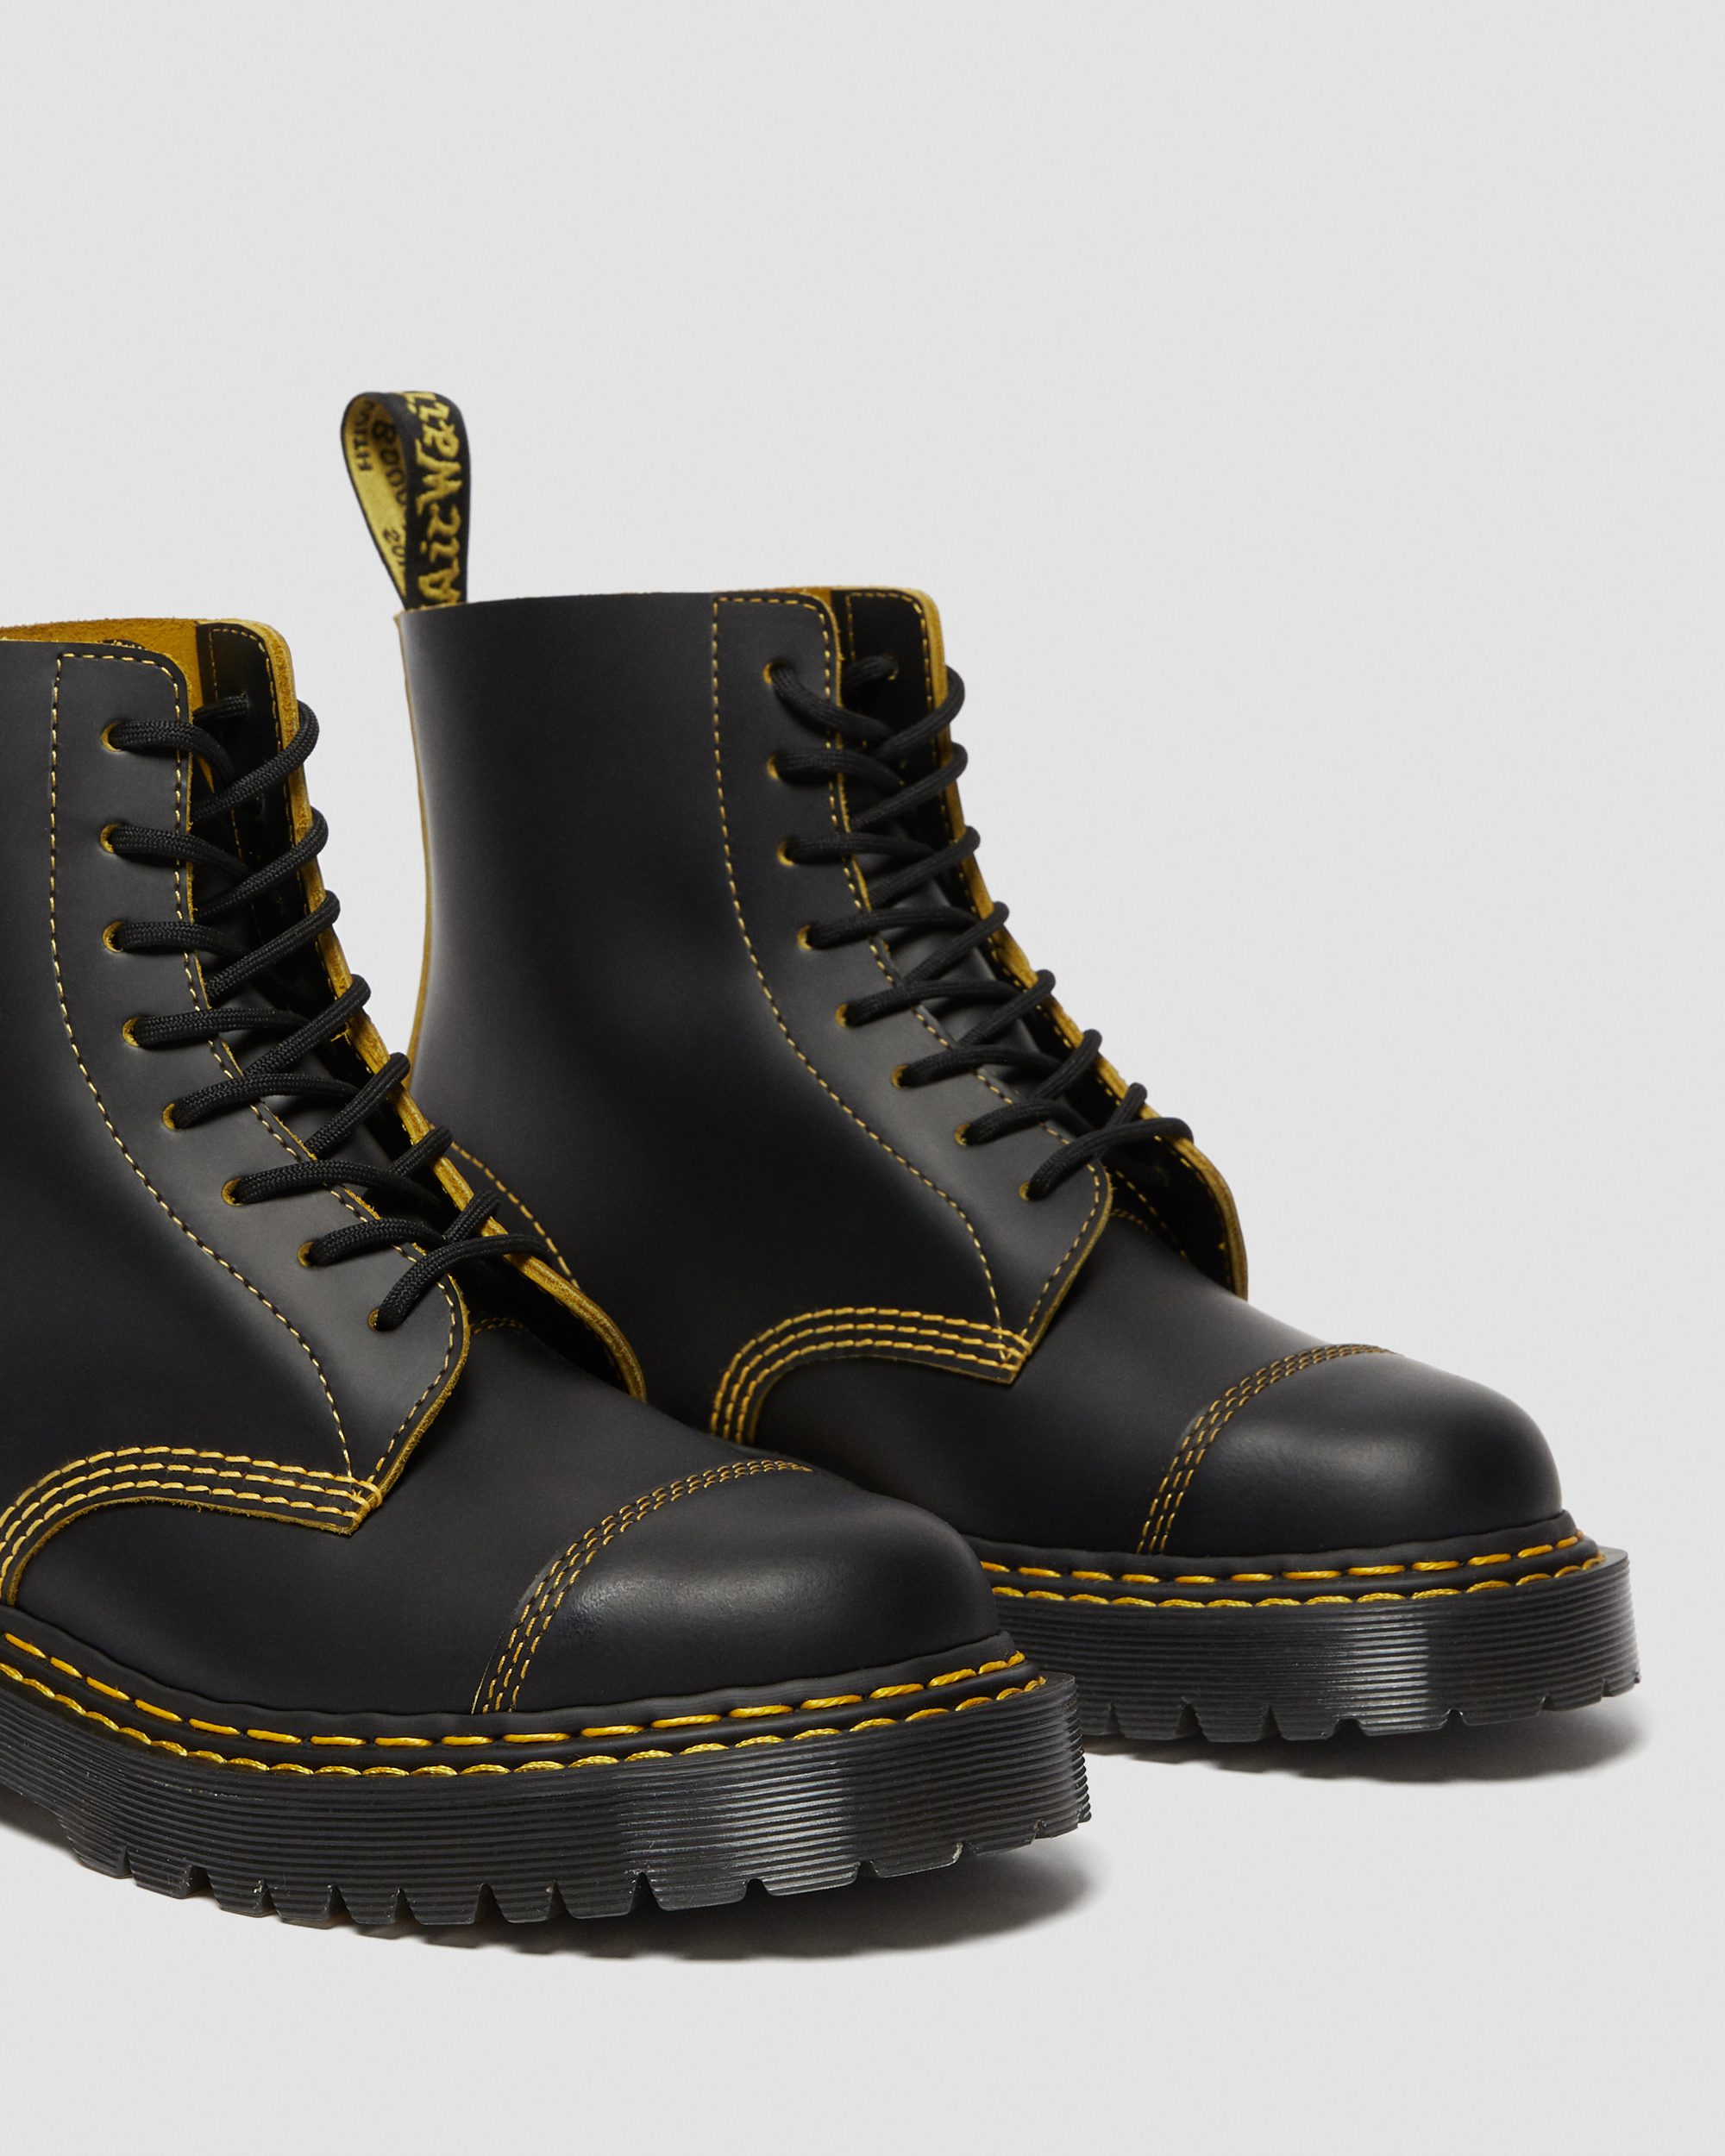 NEW LAUNCH: DR. MARTENS DOUBLE STITCH PACK - The Garnette Report